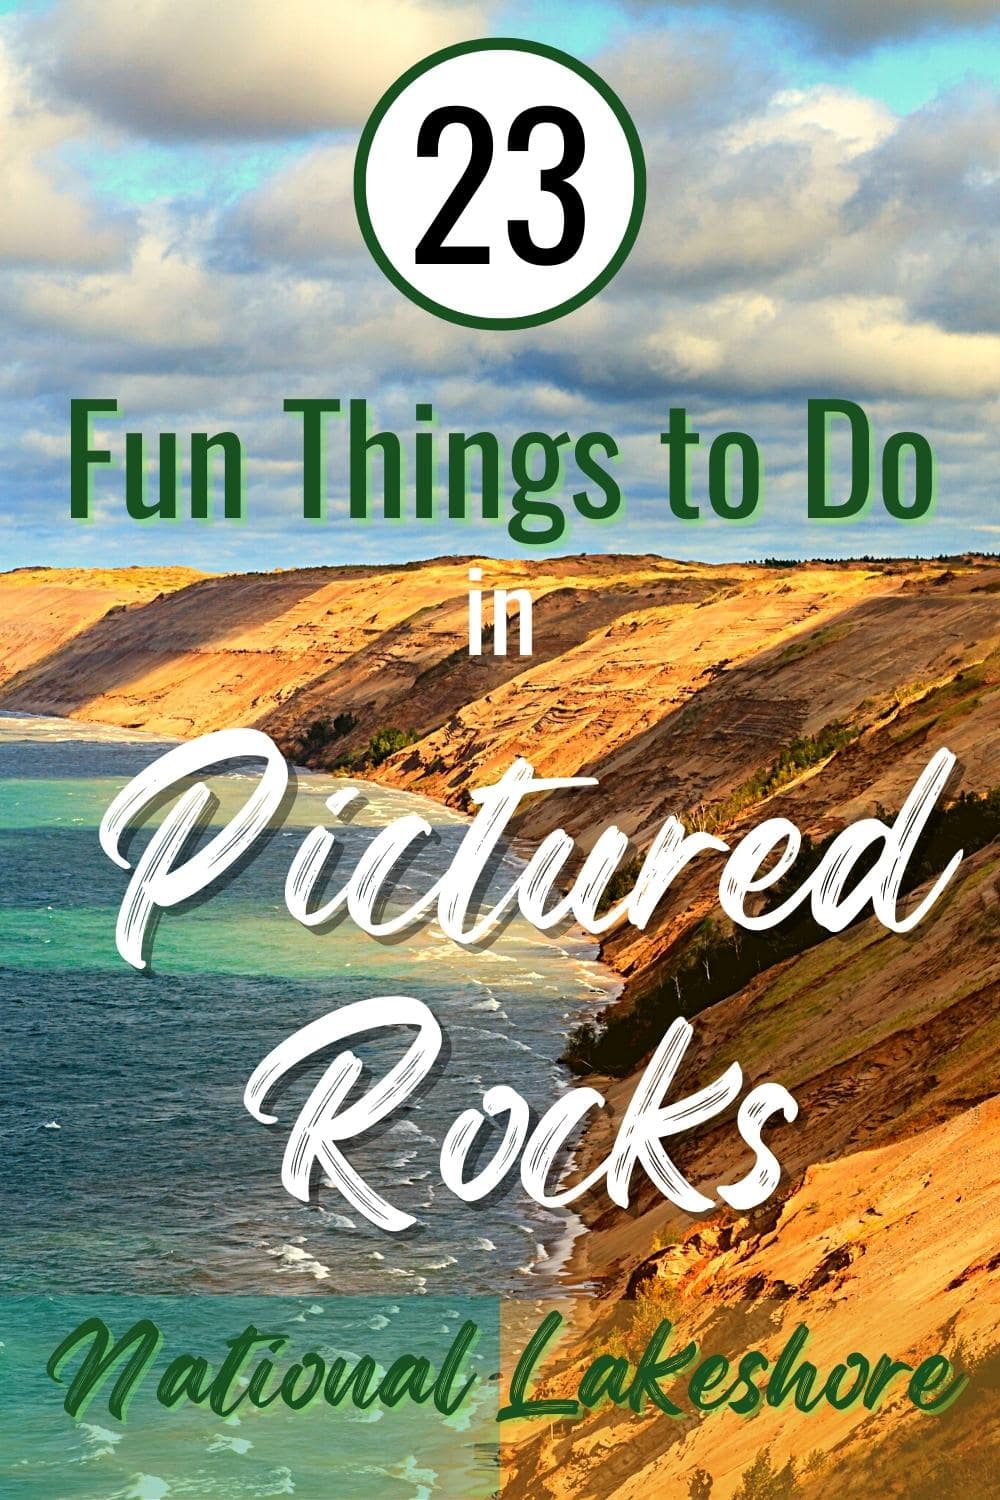 23 Fun Things to Do in Pictured Rocks National Lakeshore